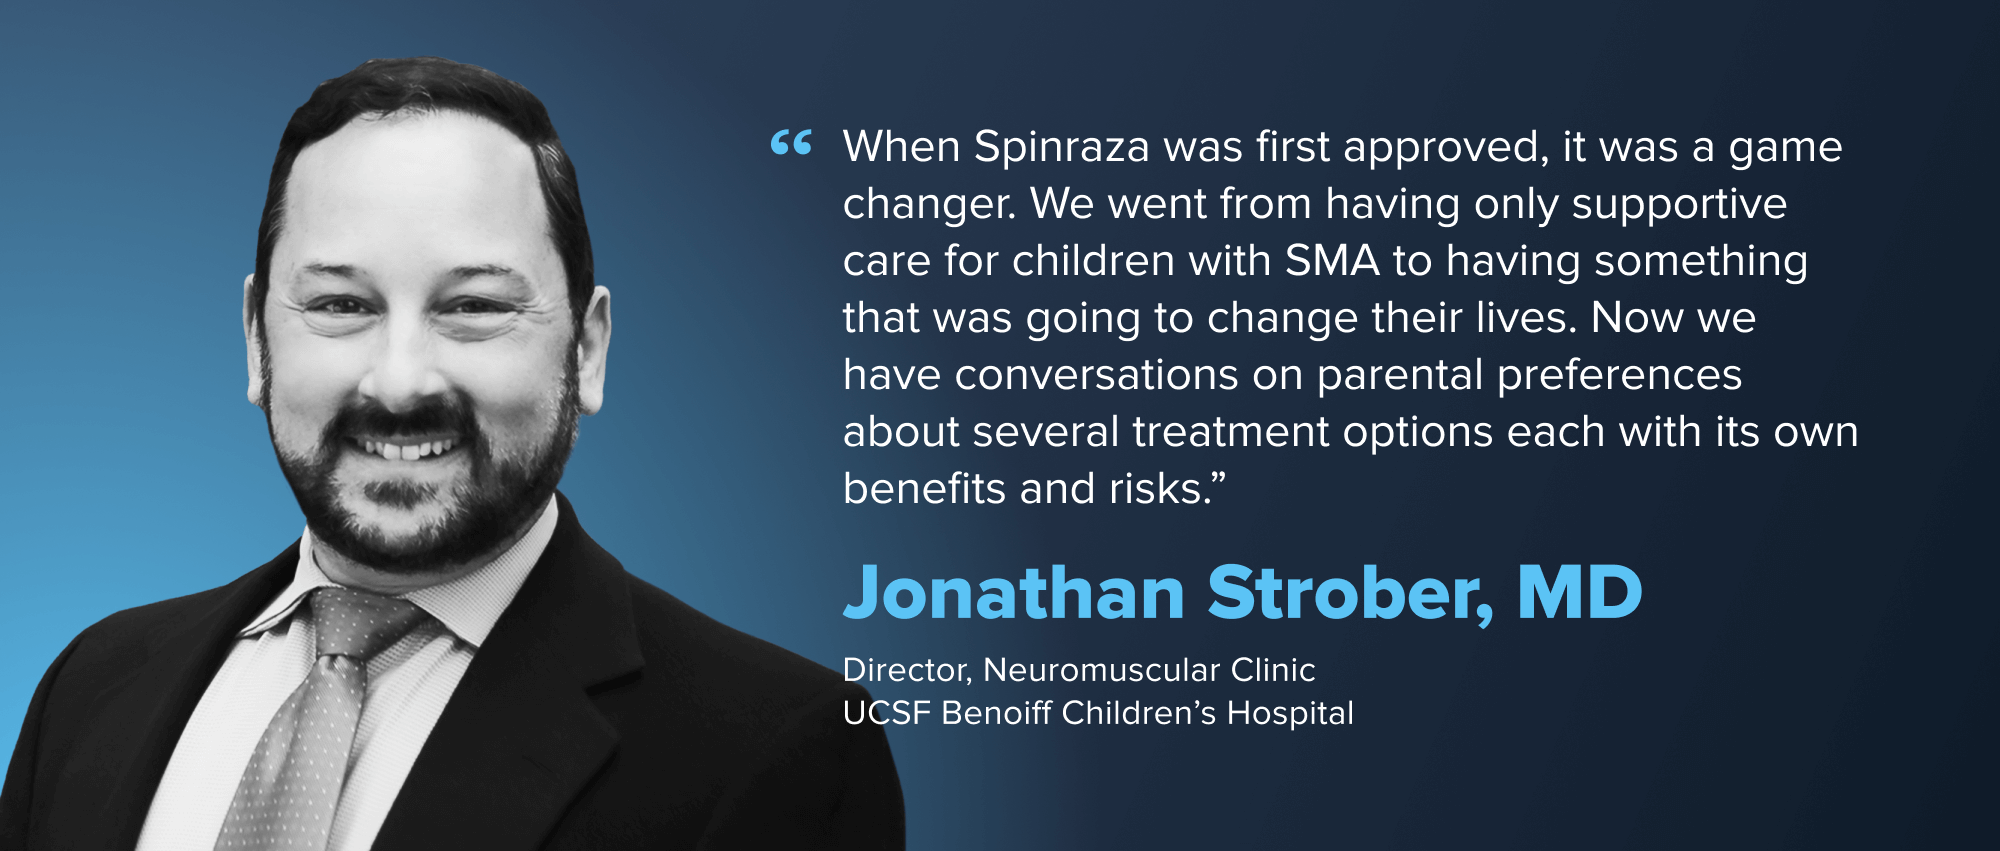 Jonathan Strober, MD: "When Spinraza was first approved, it was a game changer. We went from having only supportive care for children with SMA to having something that was going to change their lives. Now we have conversations on parental preferences about several treatment options, each with its own benefits and risks."